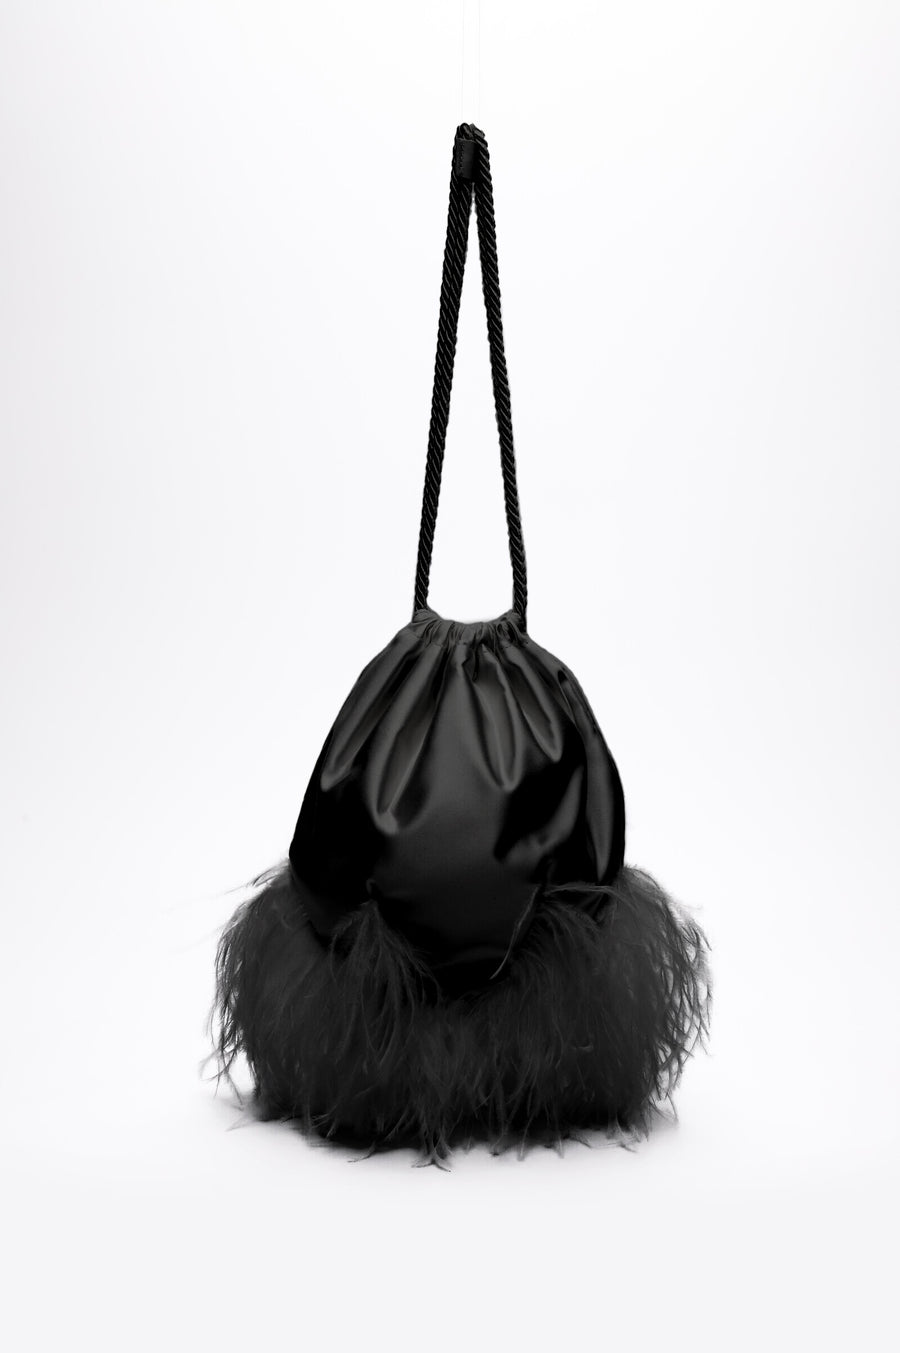 Sarah Drawstring Purse in Black Satin with Feather Bottom